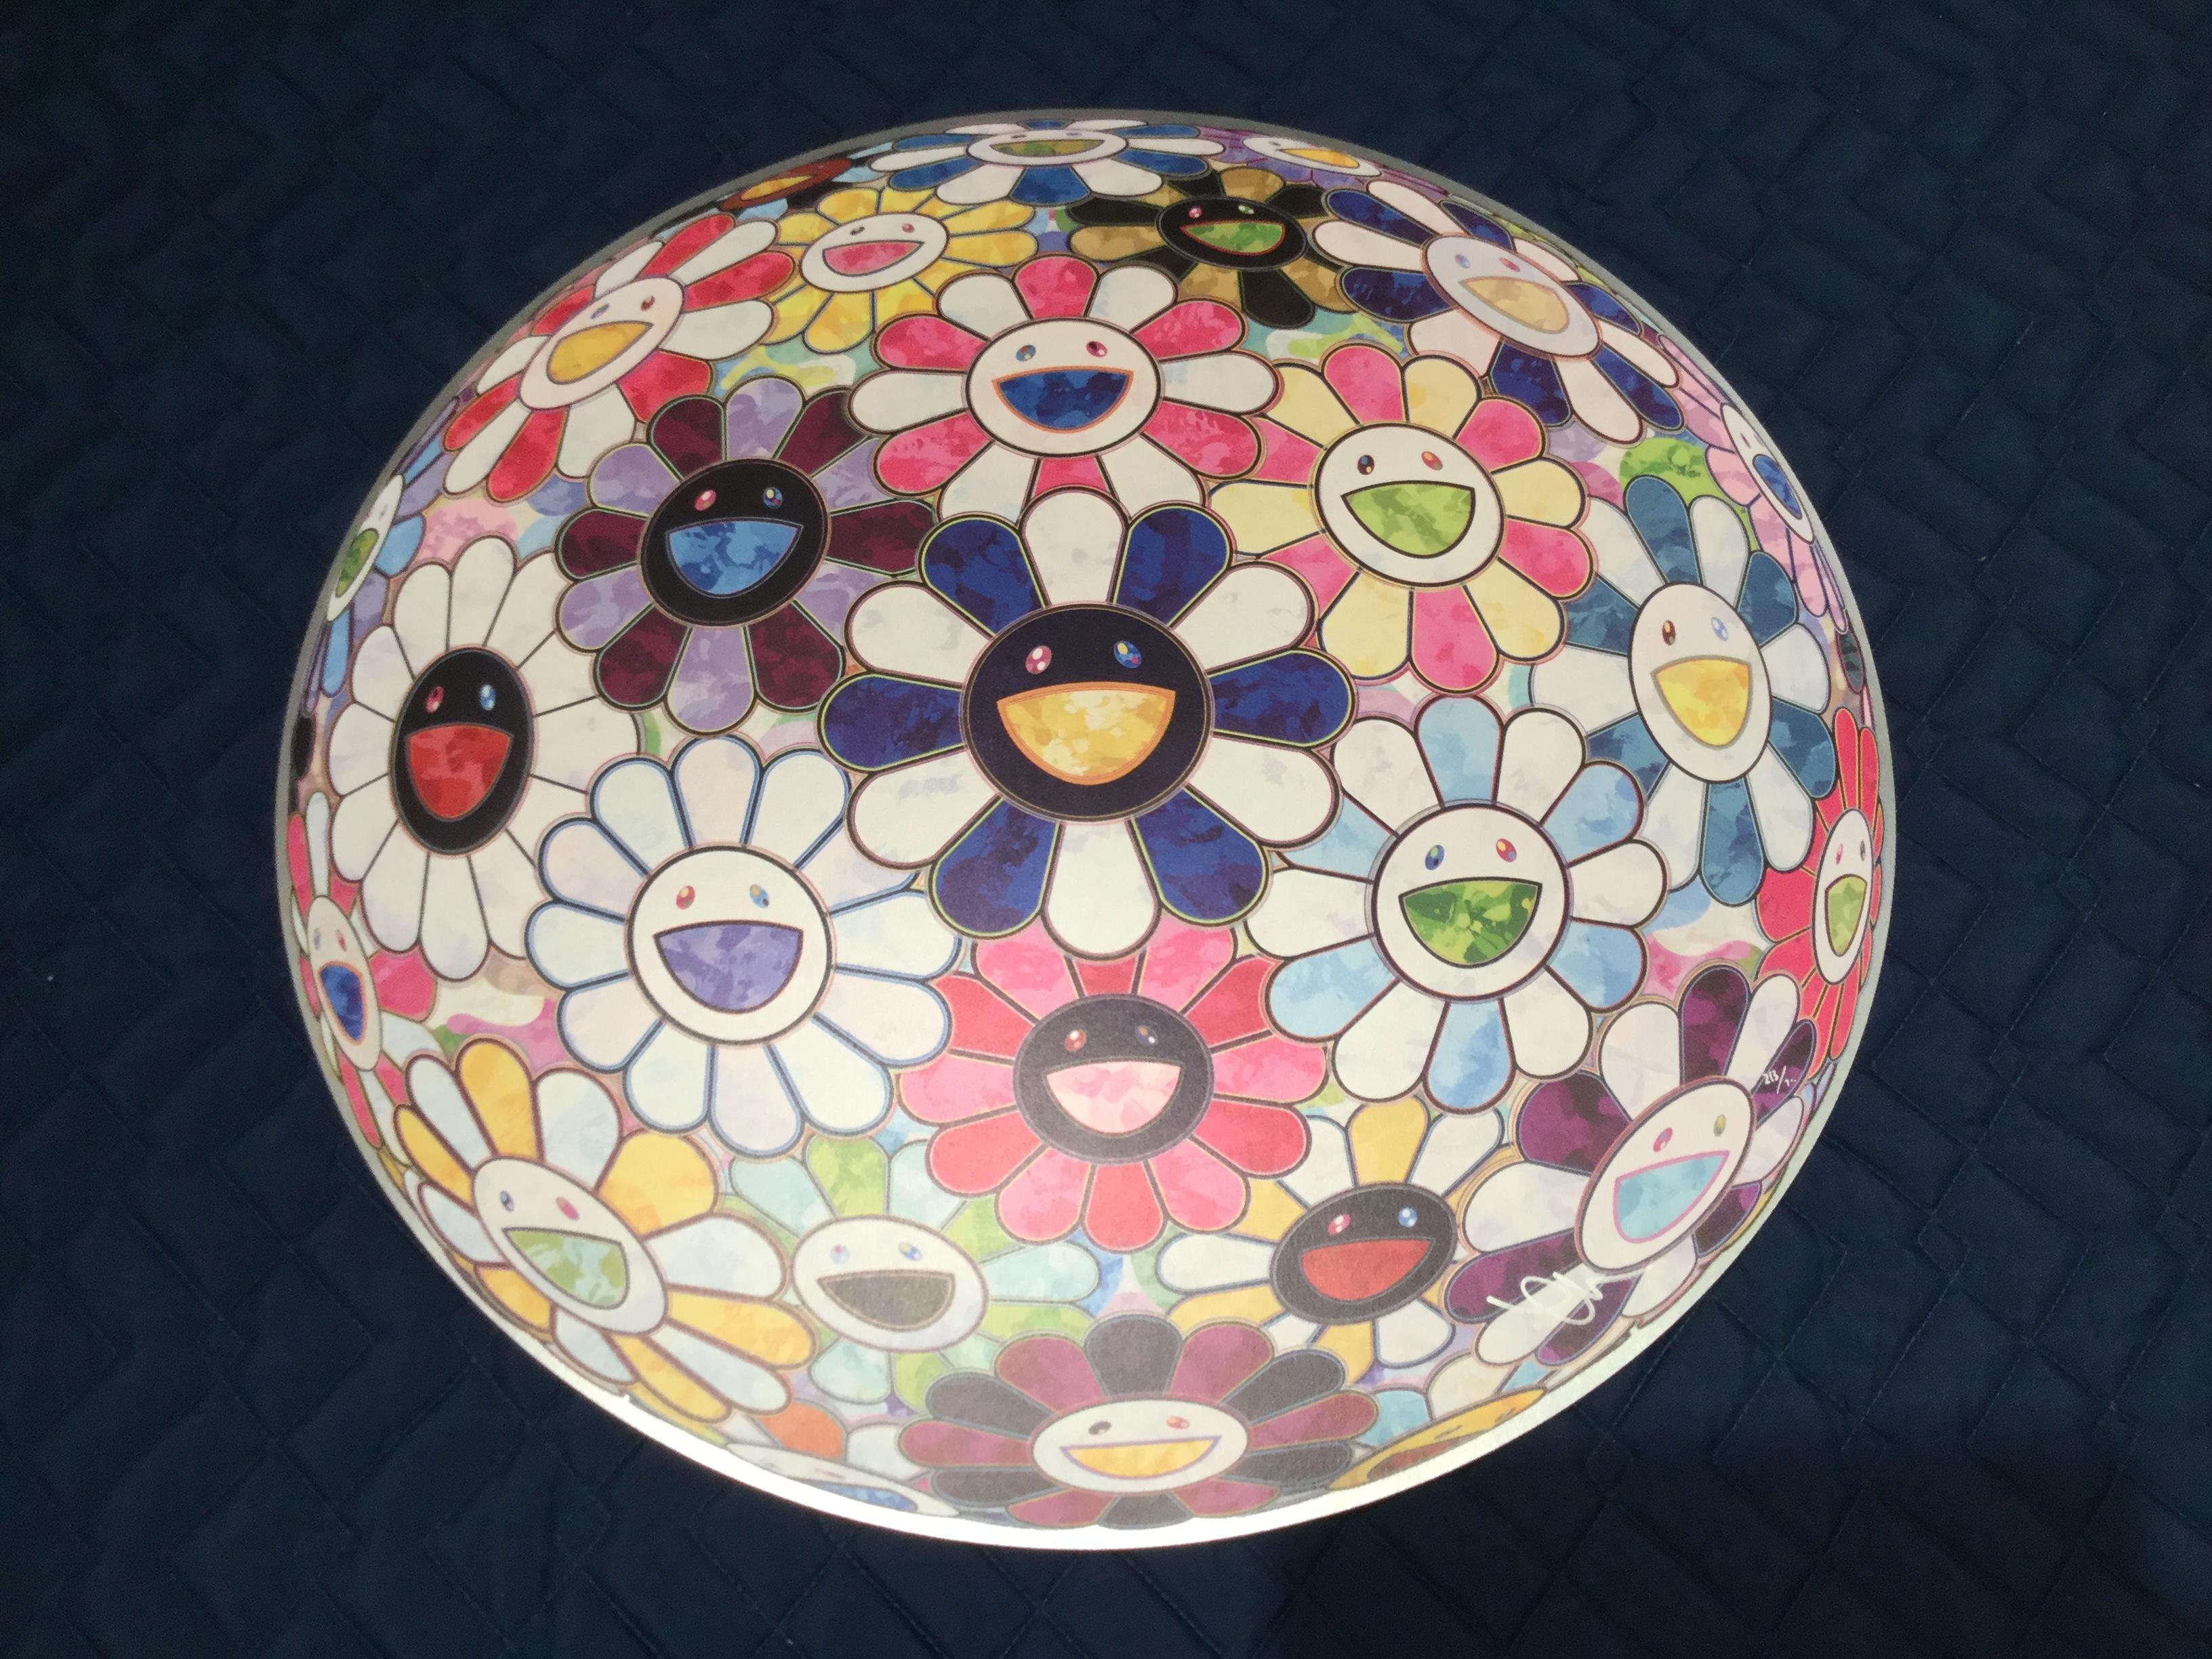 Right There... Limited Edition (print) by Murakami signed and numbered - Print by Takashi Murakami